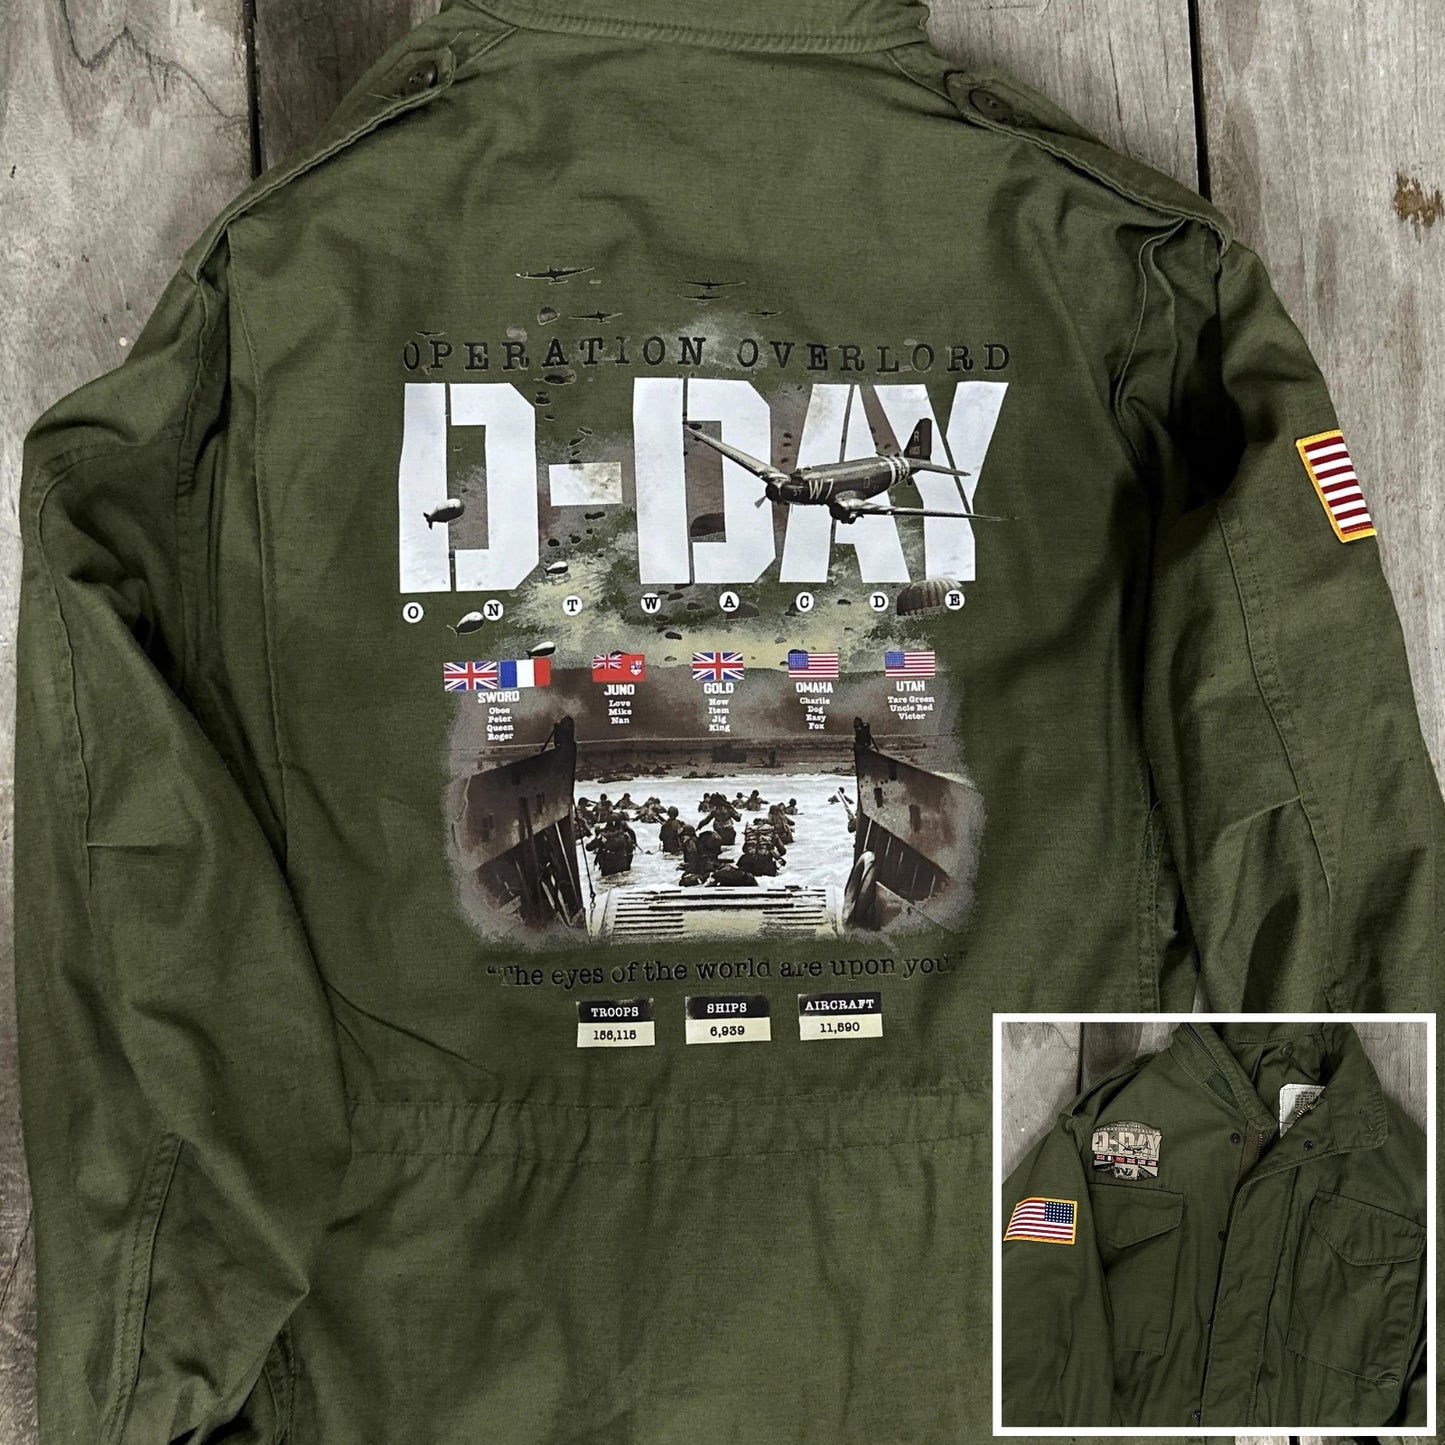 M65 Army field coats with original D-Day Operation Overlord design and a 48-star flag